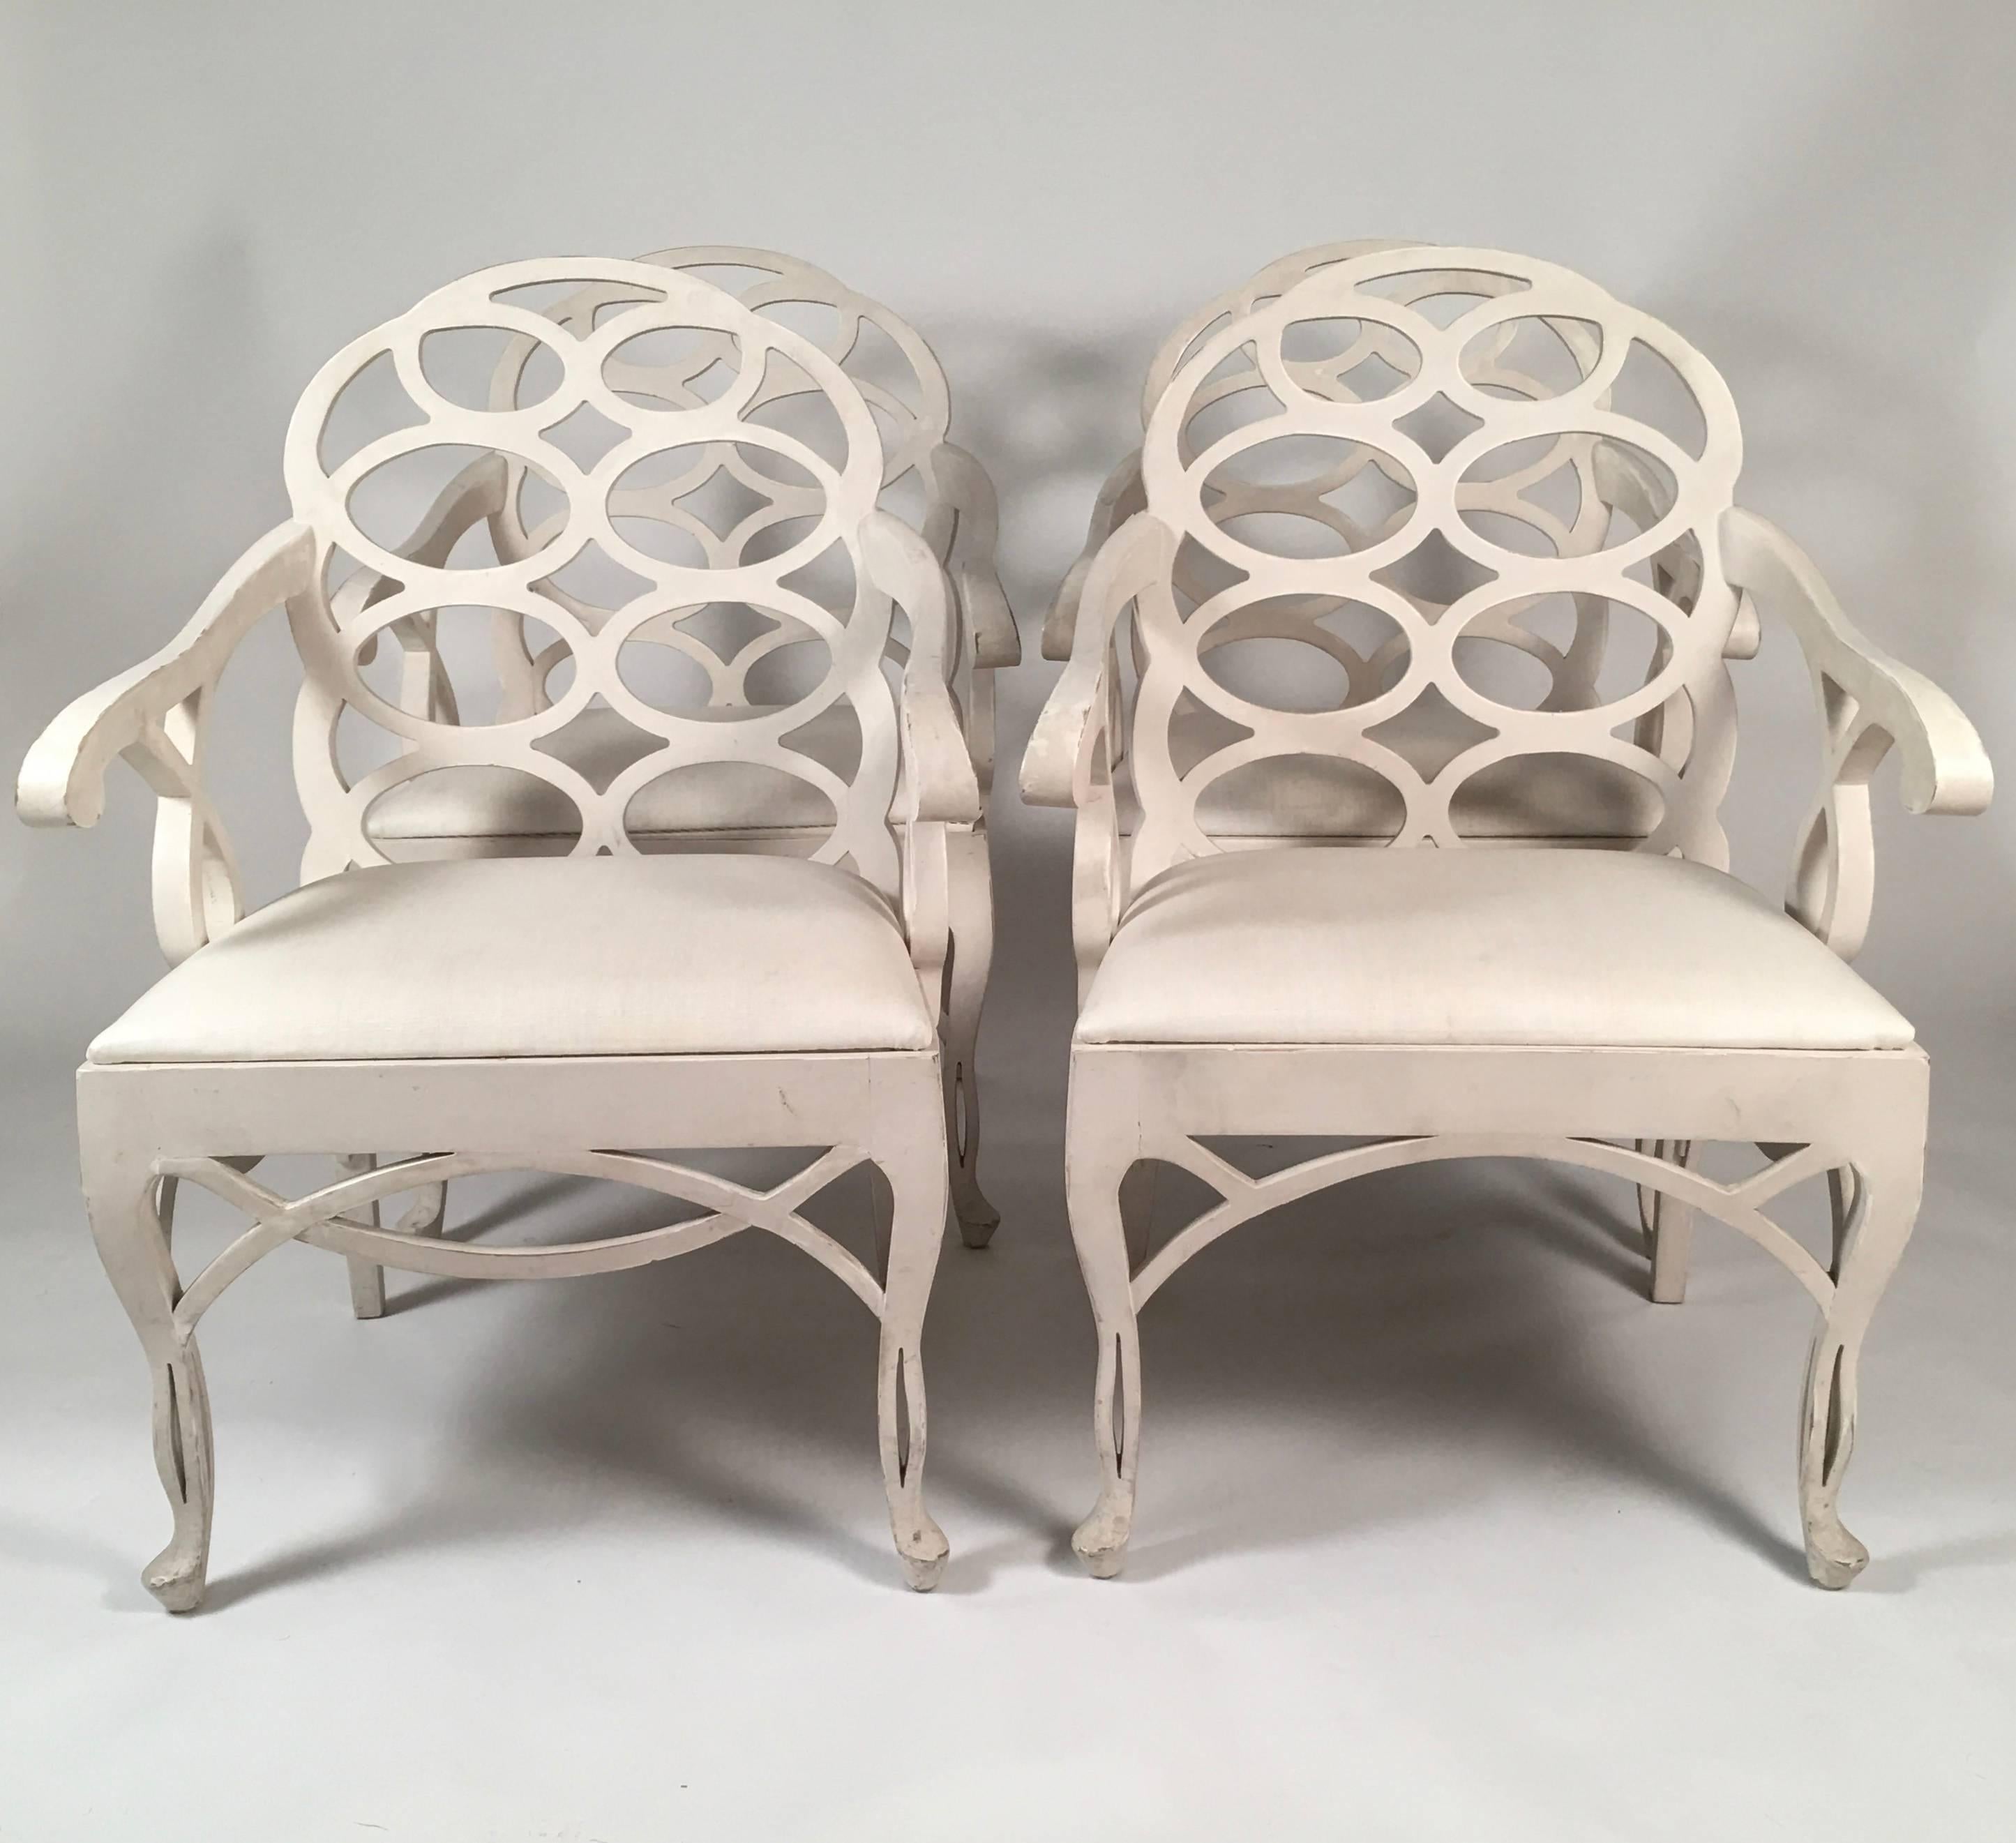 A set of four generously proportioned Loop armchairs, by iconic designer Frances Elkins (1883-1953), in cream lacquered wood, the backs with wonderfully graphic oval latticework design , with down swept arms, with loop supports, over an upholstered